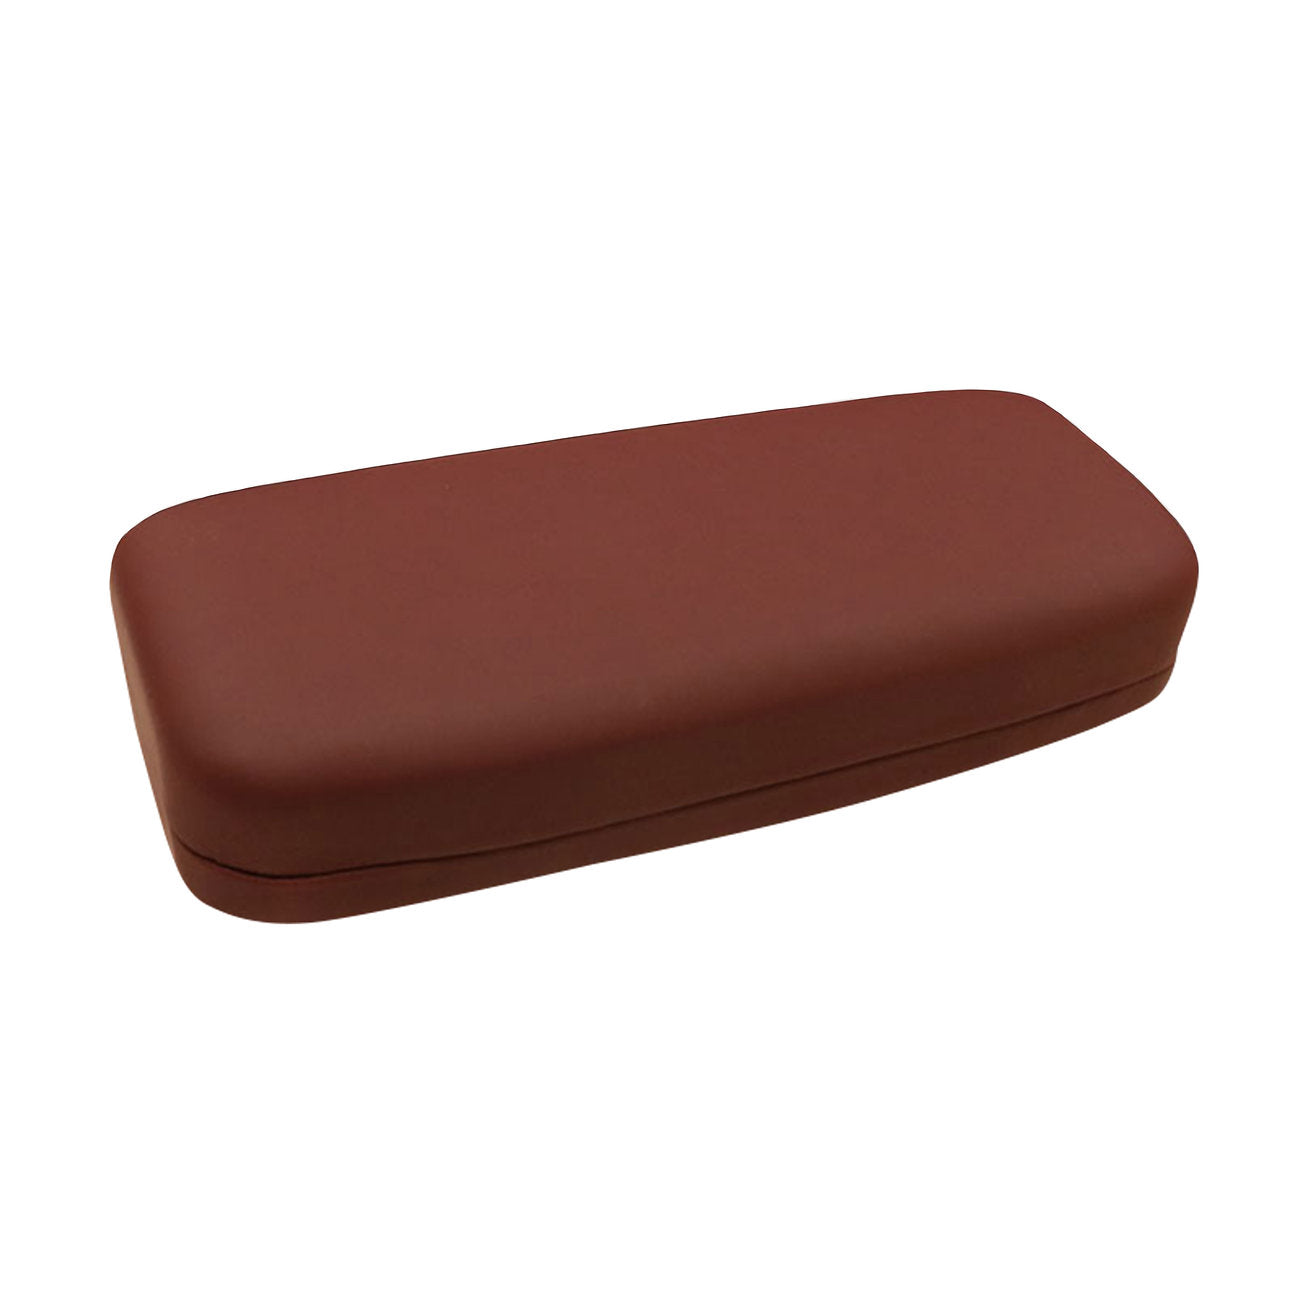 Brown clamshell case for glasses